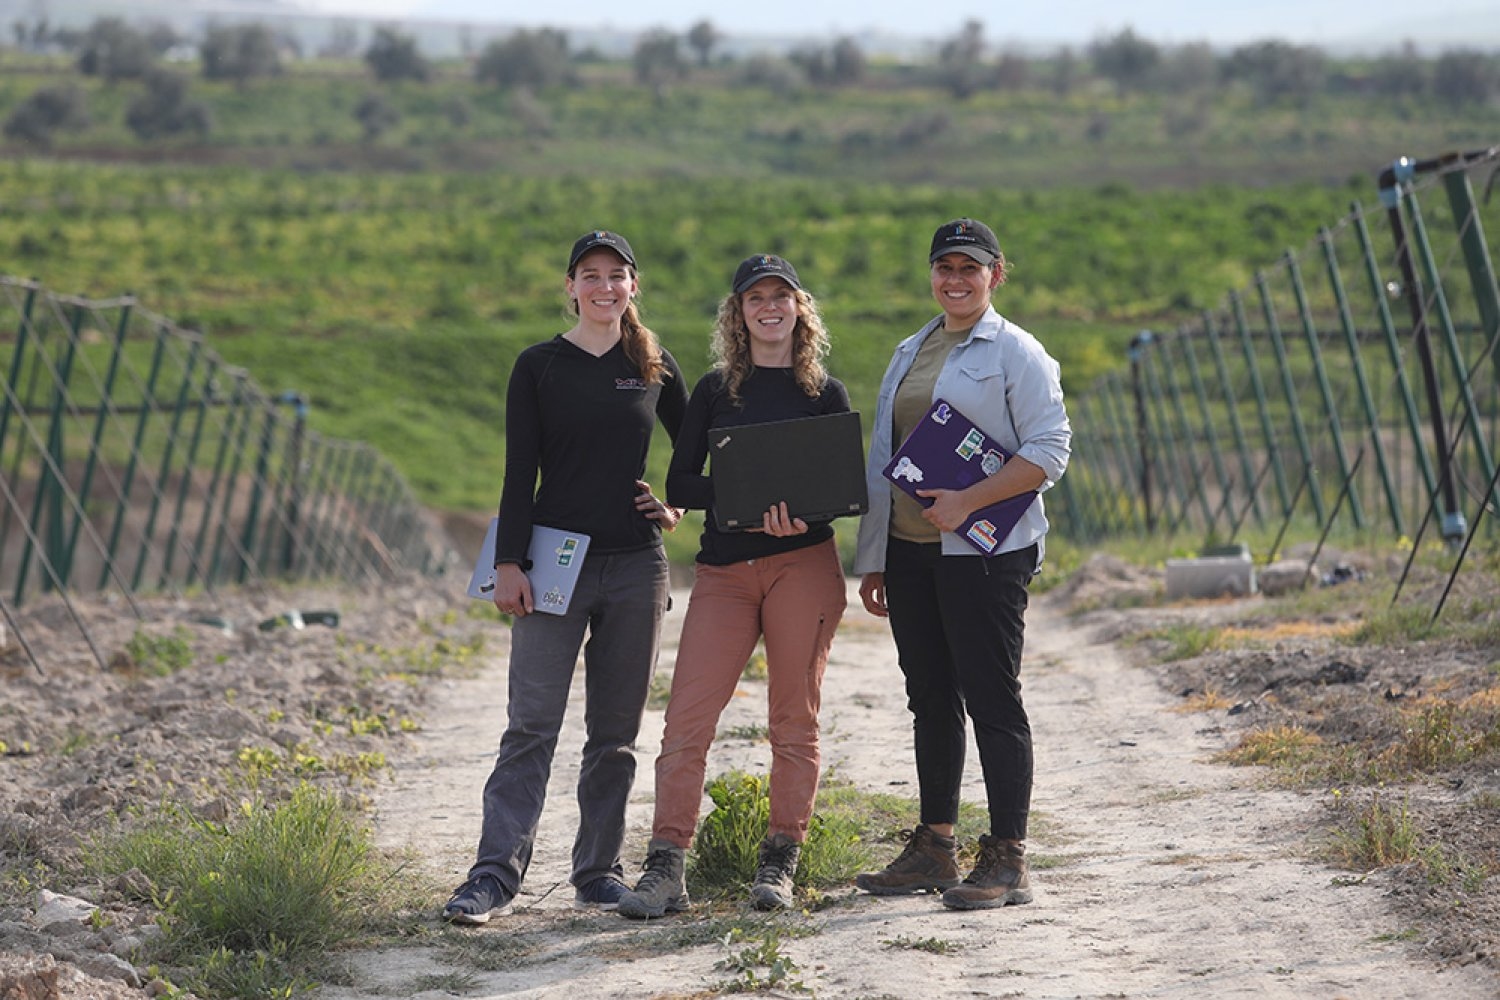 Global Engineering and Research (GEAR) Lab students (from left to right) Georgia Van de Zande, Carolyn Sheline, and Fiona Grant pilot a low-cost precision irrigation controller that optimizes system energy and water use at a full-scale test farm in the Jordan Valley.